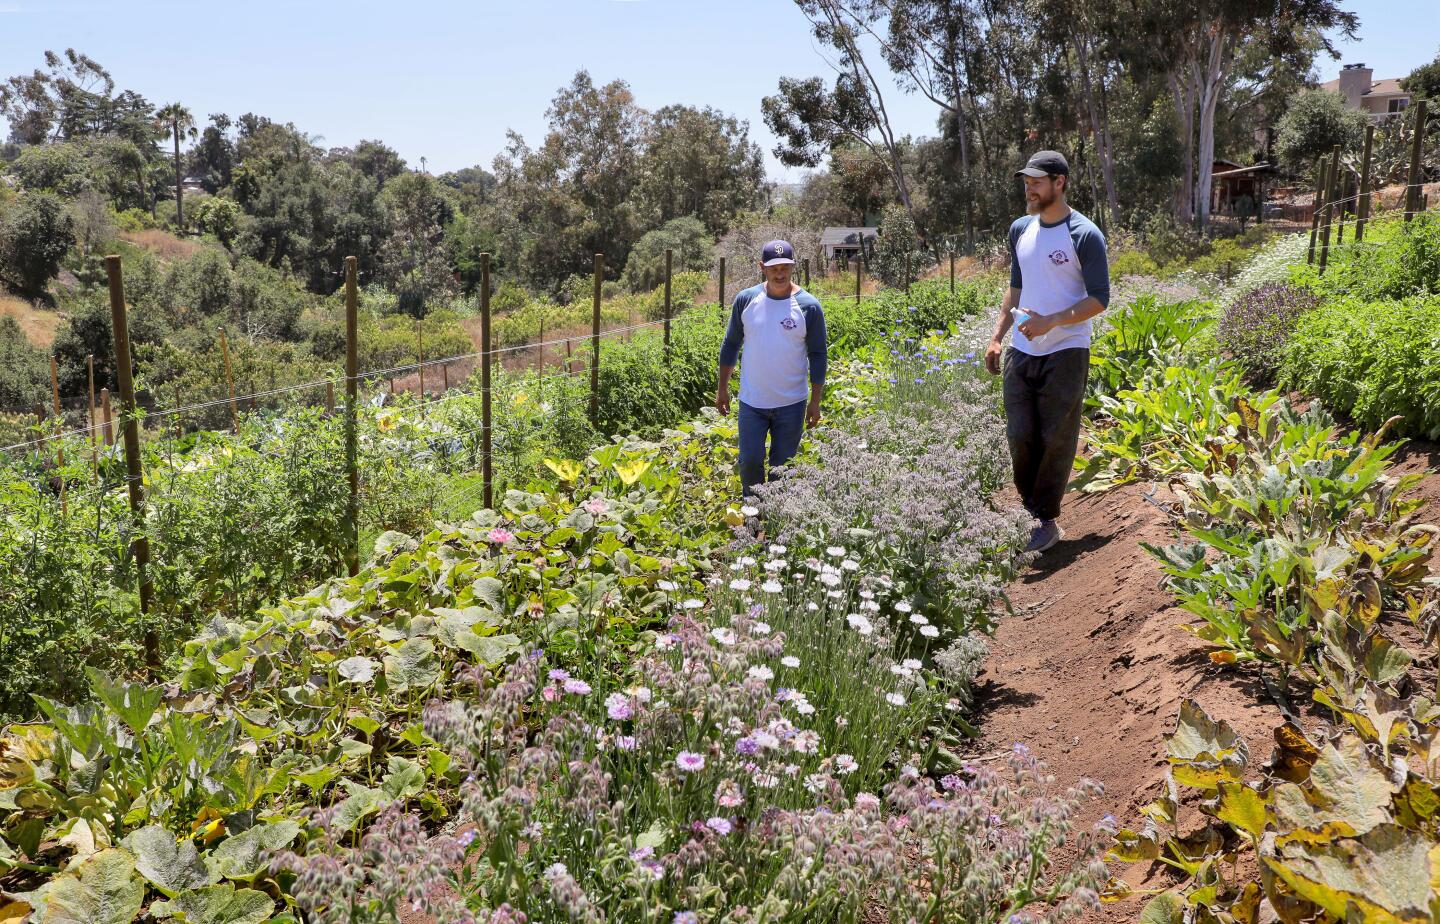 Richard Viles, left, and son Jonathan Viles walk among rows of various vegetables at Sand N' Straw Community Farm. Richard and his wife April own the farm.